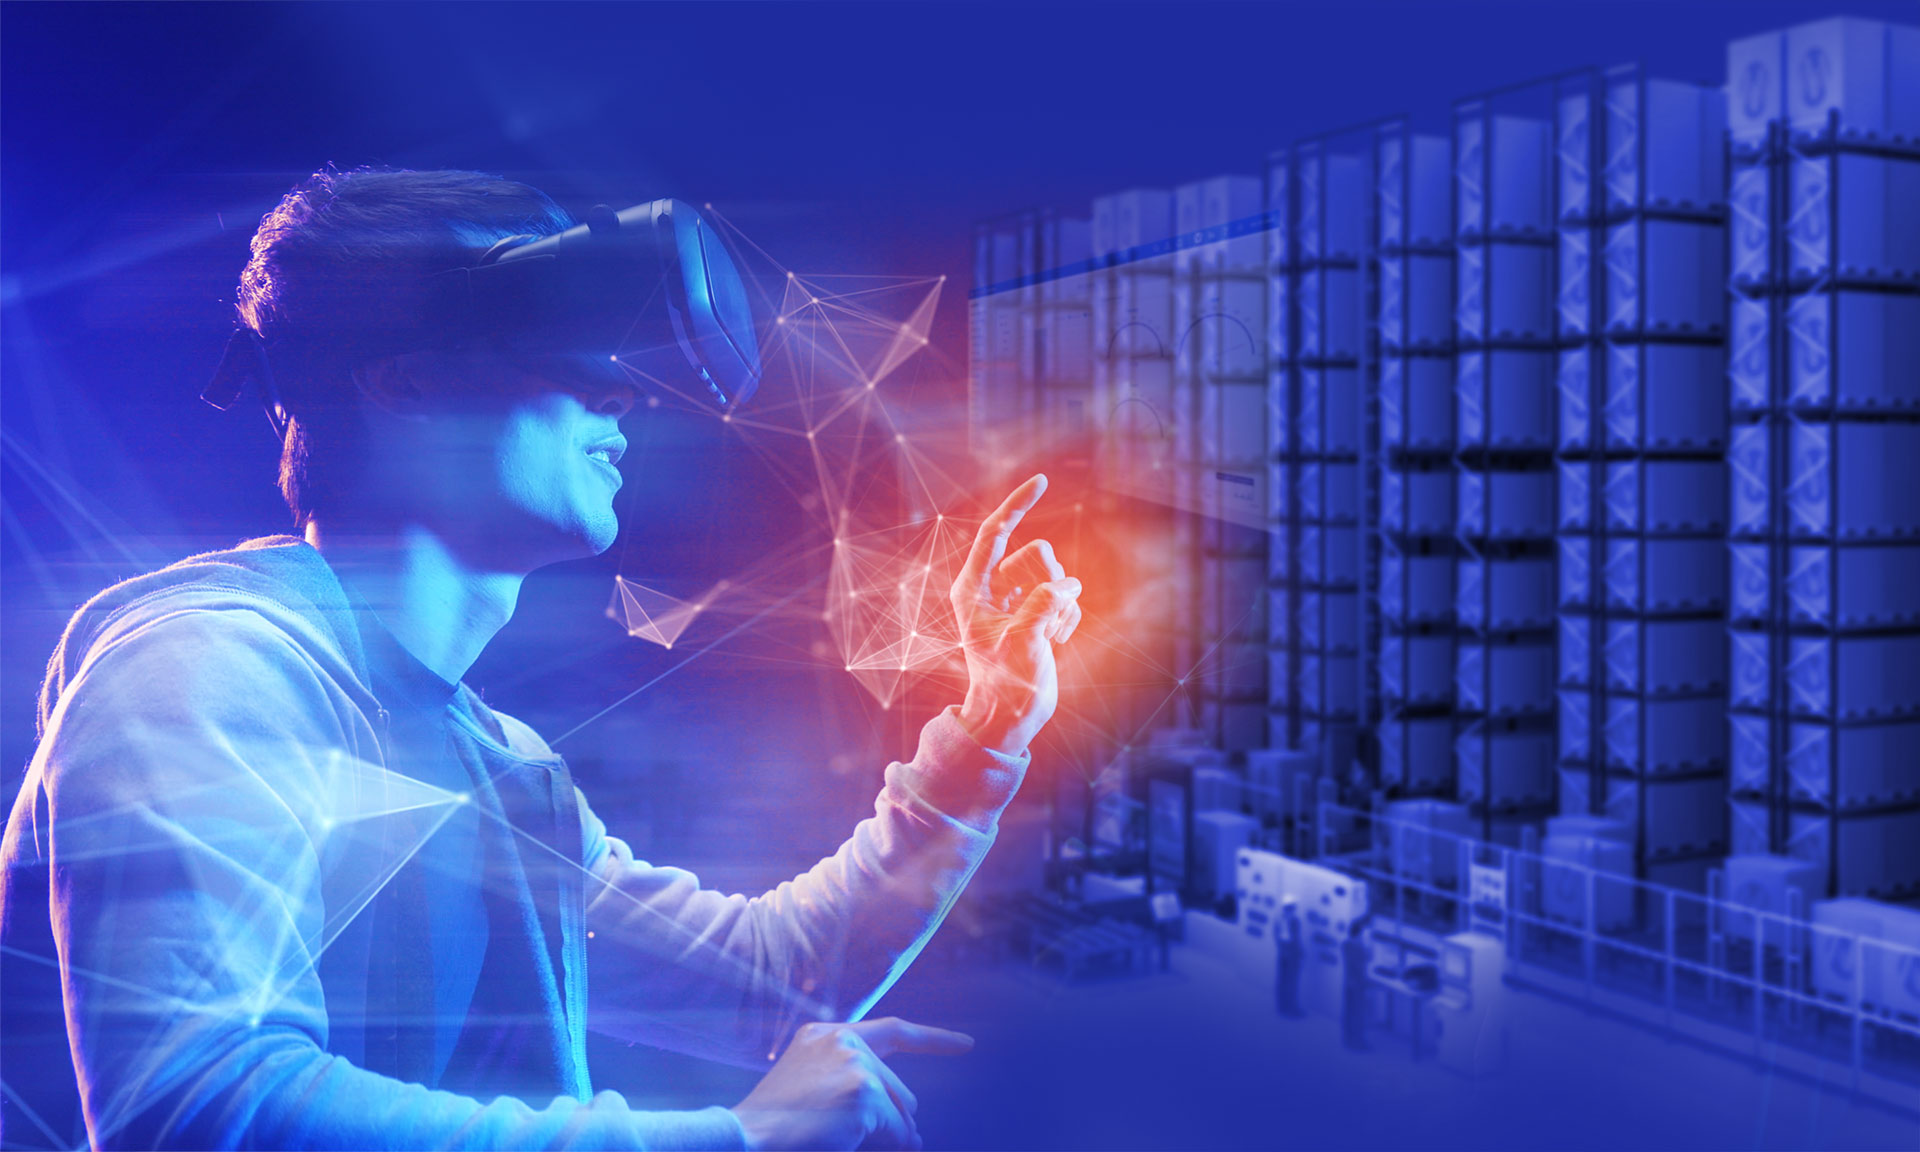 The metaverse: how would it affect industry and logistics?